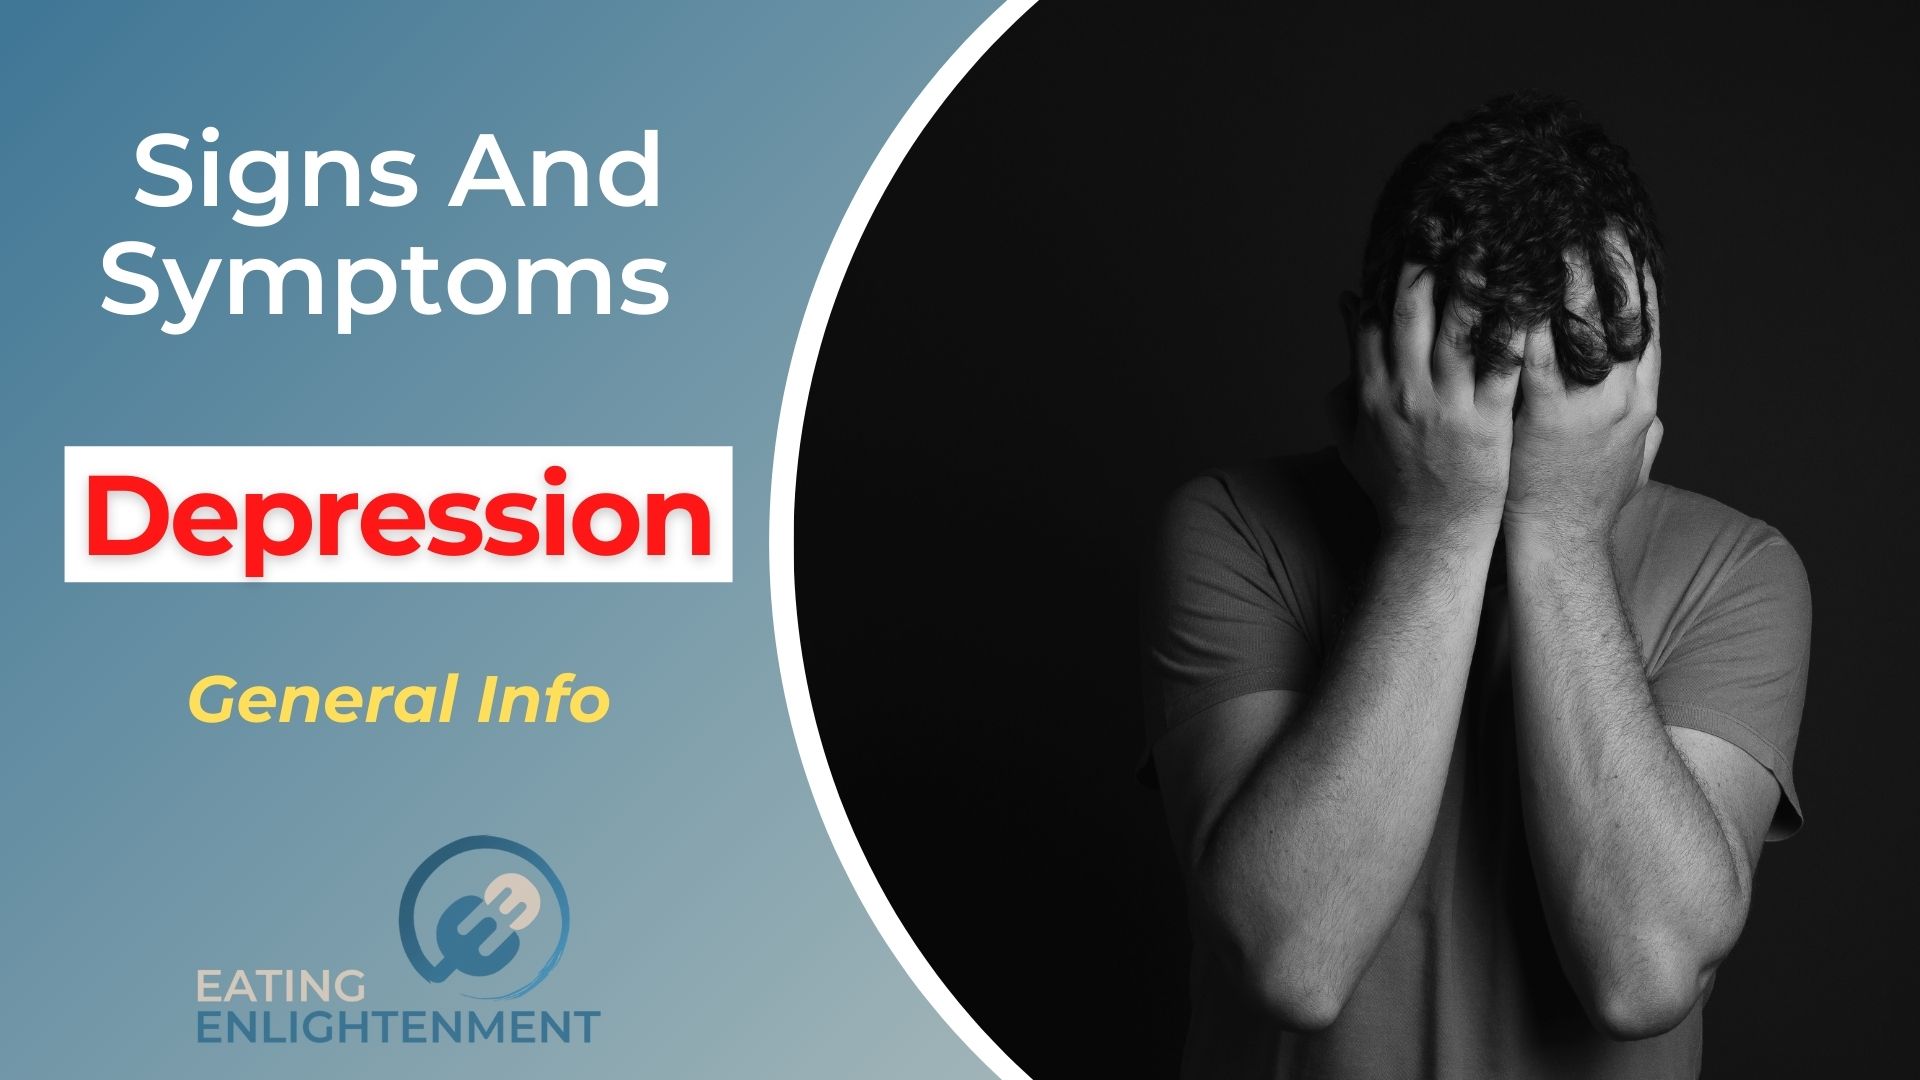 Signs And Symptoms Of Depression